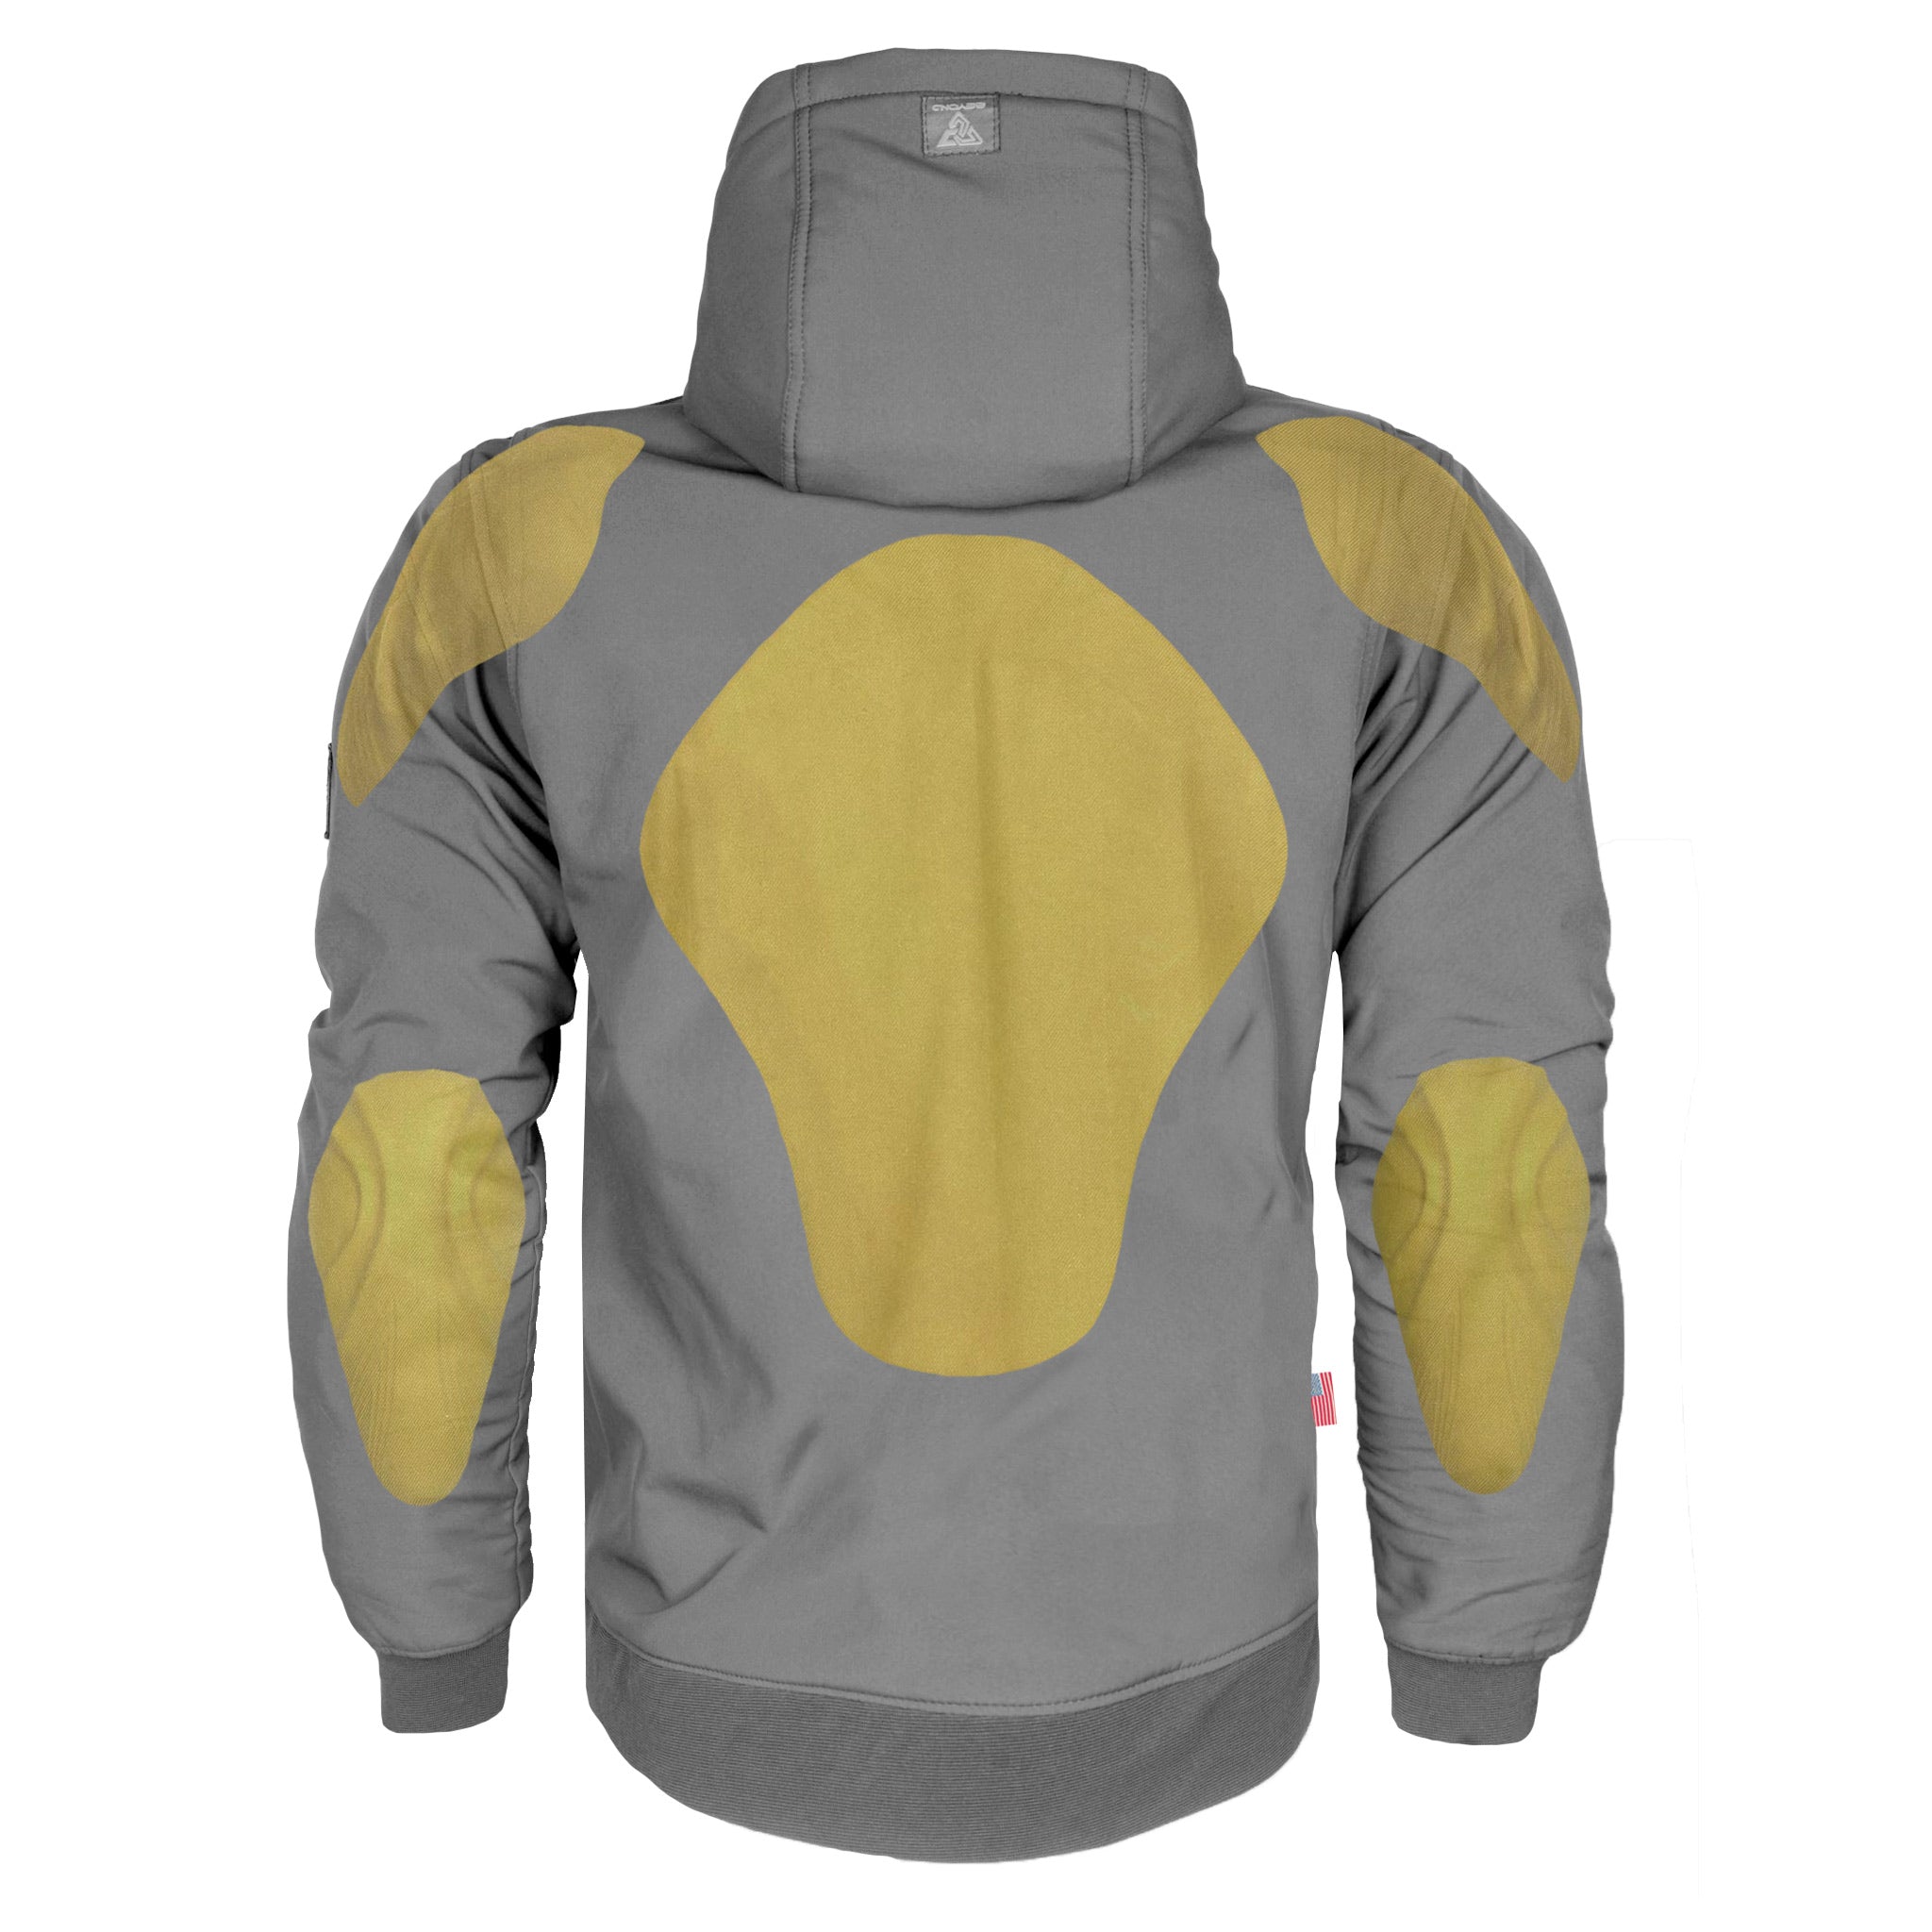 Unisex-Softshell-Hoodie-Gray-Matte-Color-Back-with-Pads